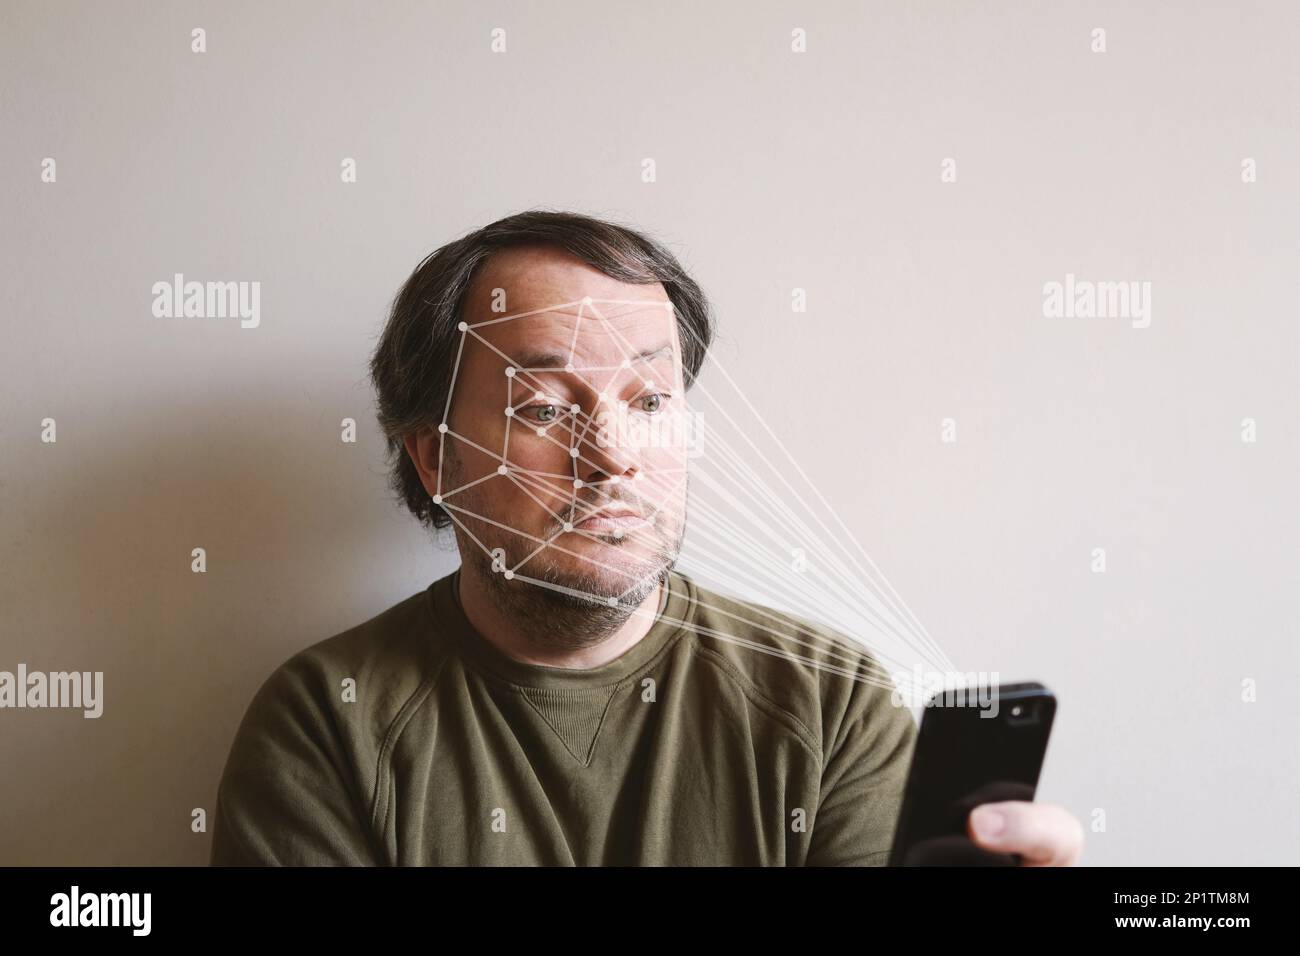 facial recognition by smartphone allows biometric authentication and face expression tracking Stock Photo